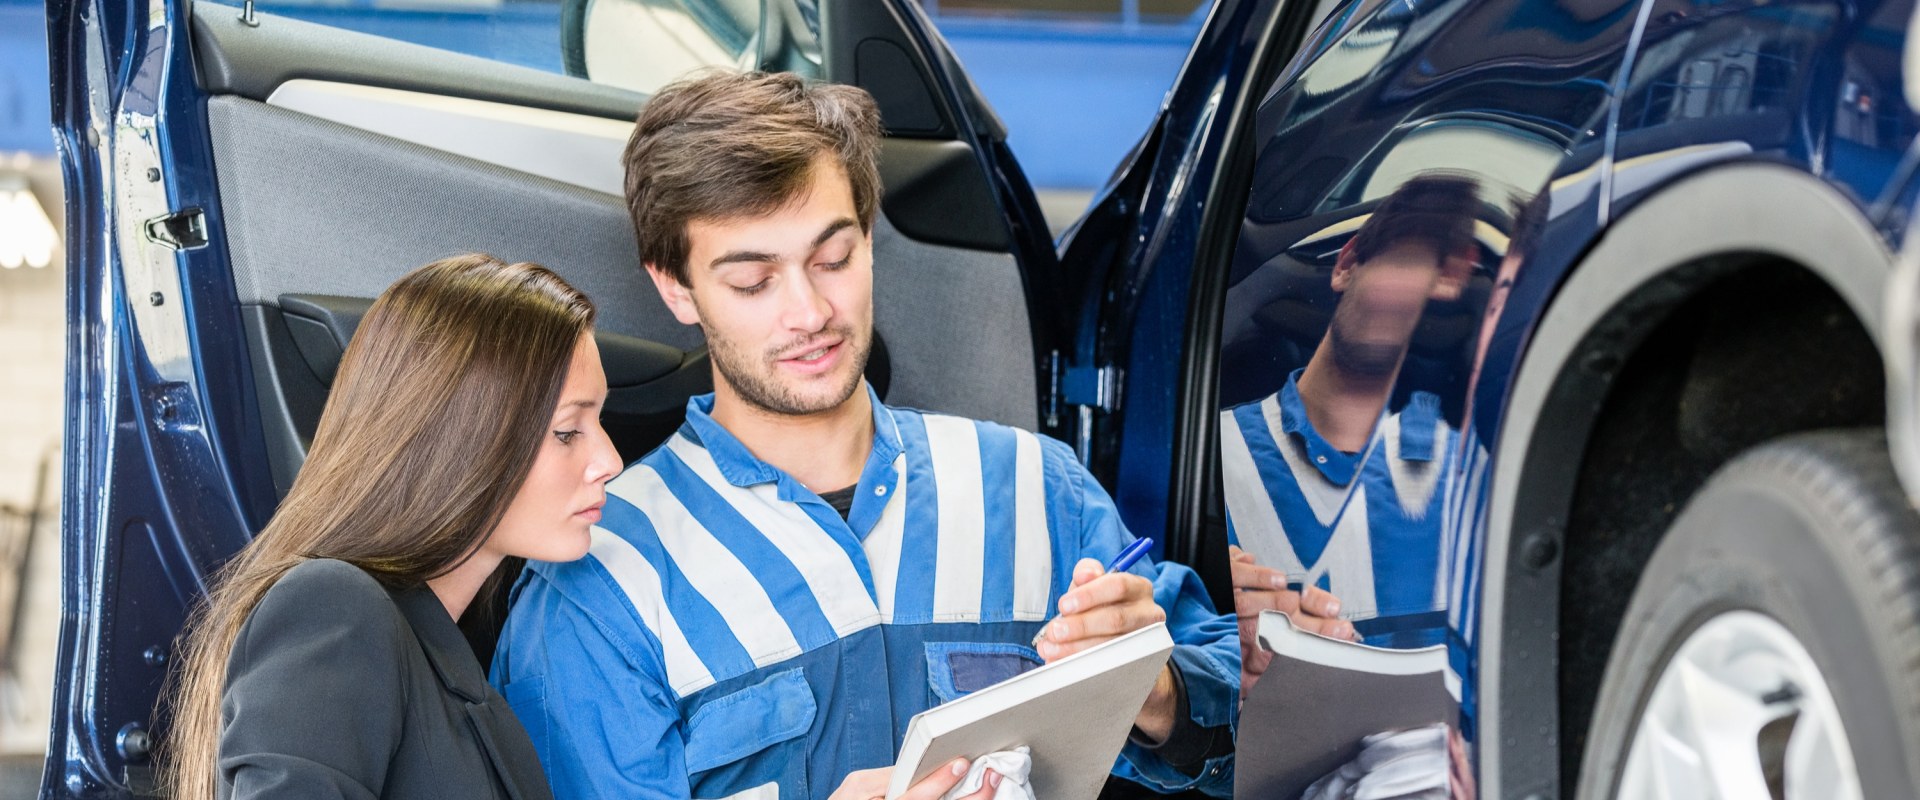 What are examples of car maintenance?